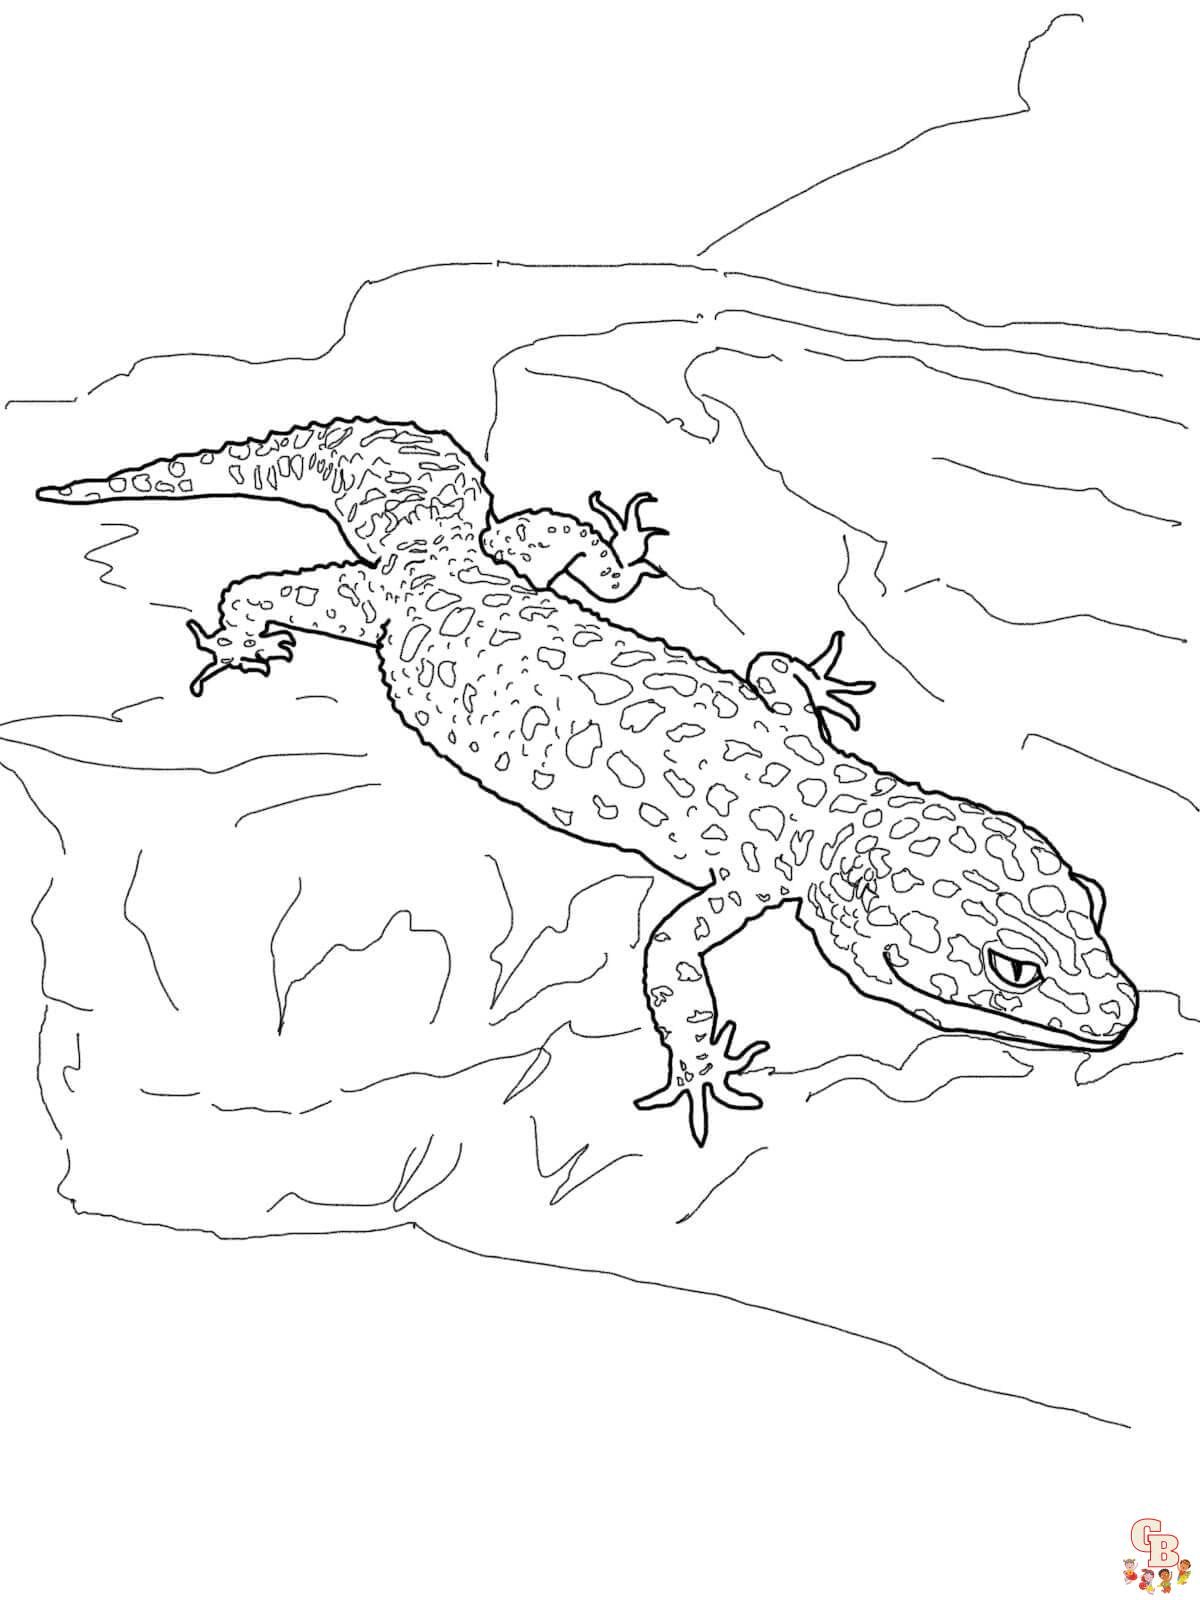 Gecko Coloring Pages